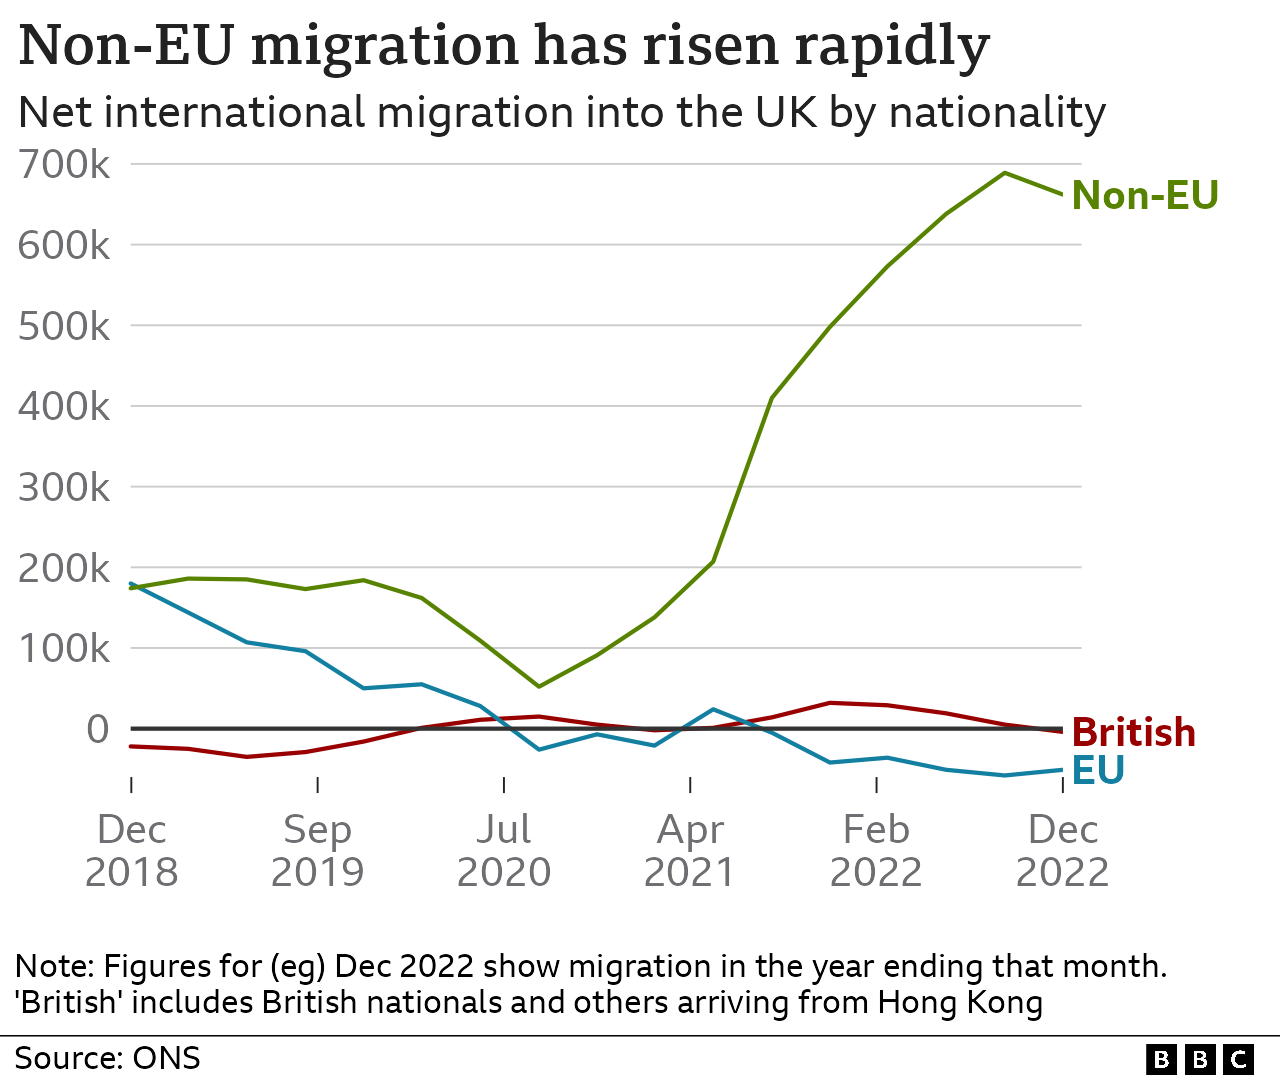 A line chart with three lines showing net migration since 2018 divided into non-EU citizens, EU citizens and British nationals. The trend for non-EU citizens rises sharply to just under 700,000 in the year to September 2022, before dipping slightly in the year to December. The EU and British lines show a decline to below zero.